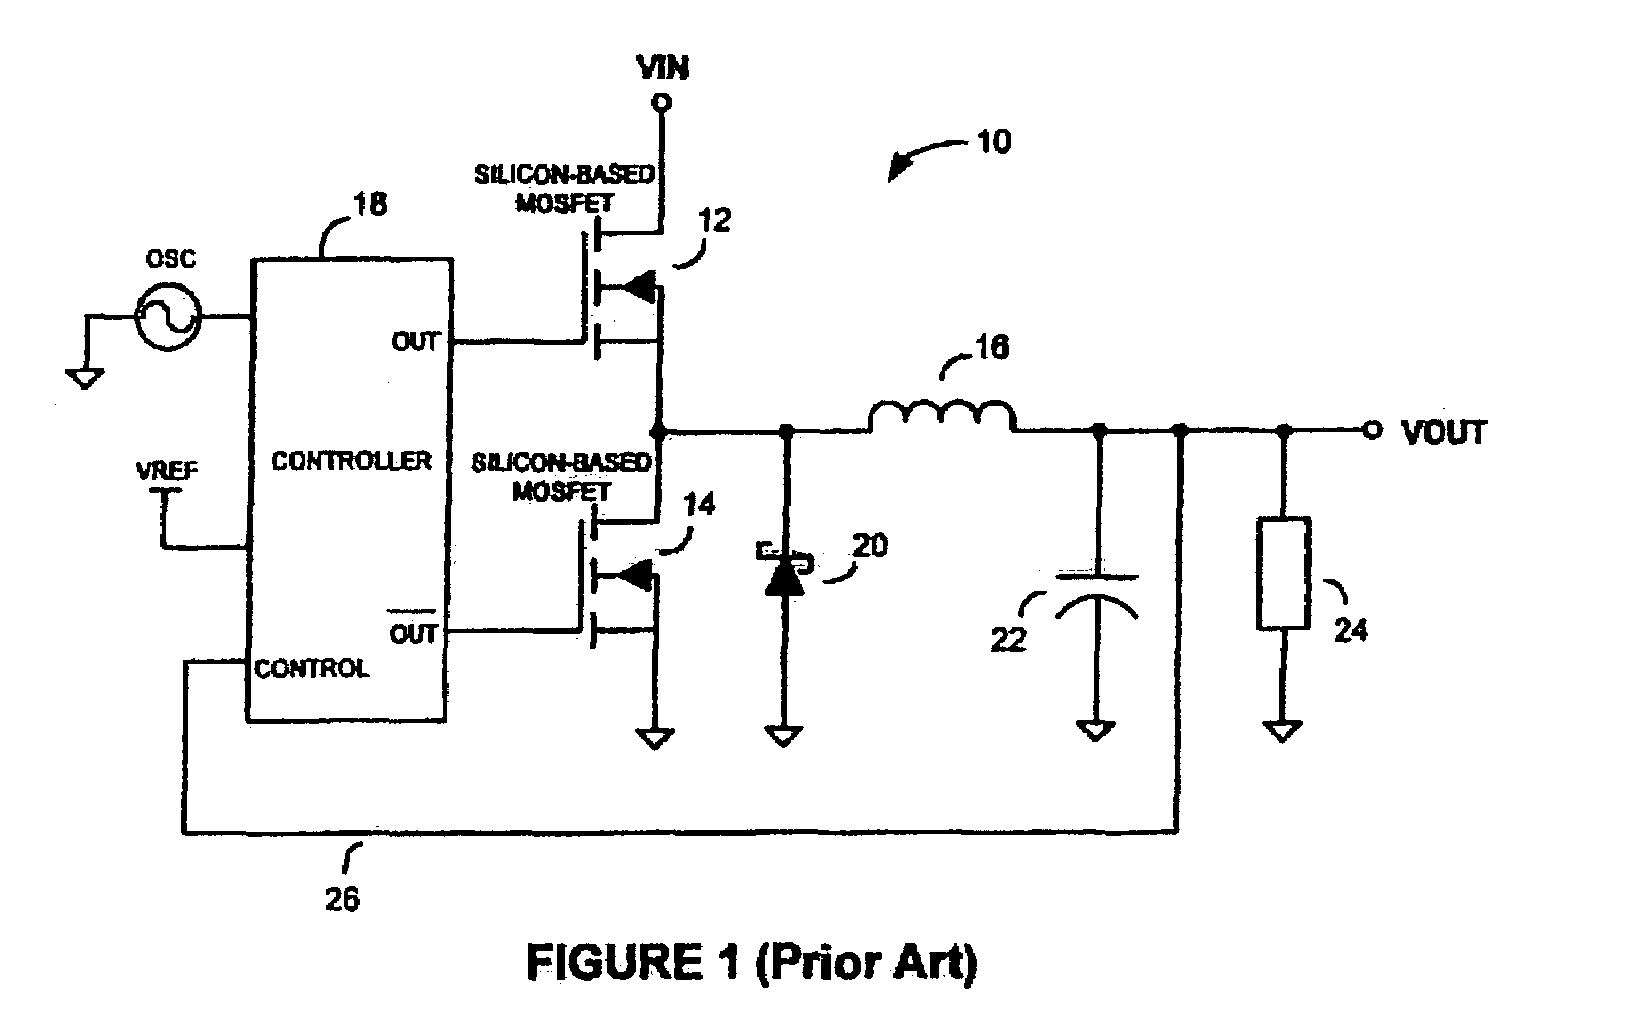 Extremely high-speed switchmode DC-DC converters